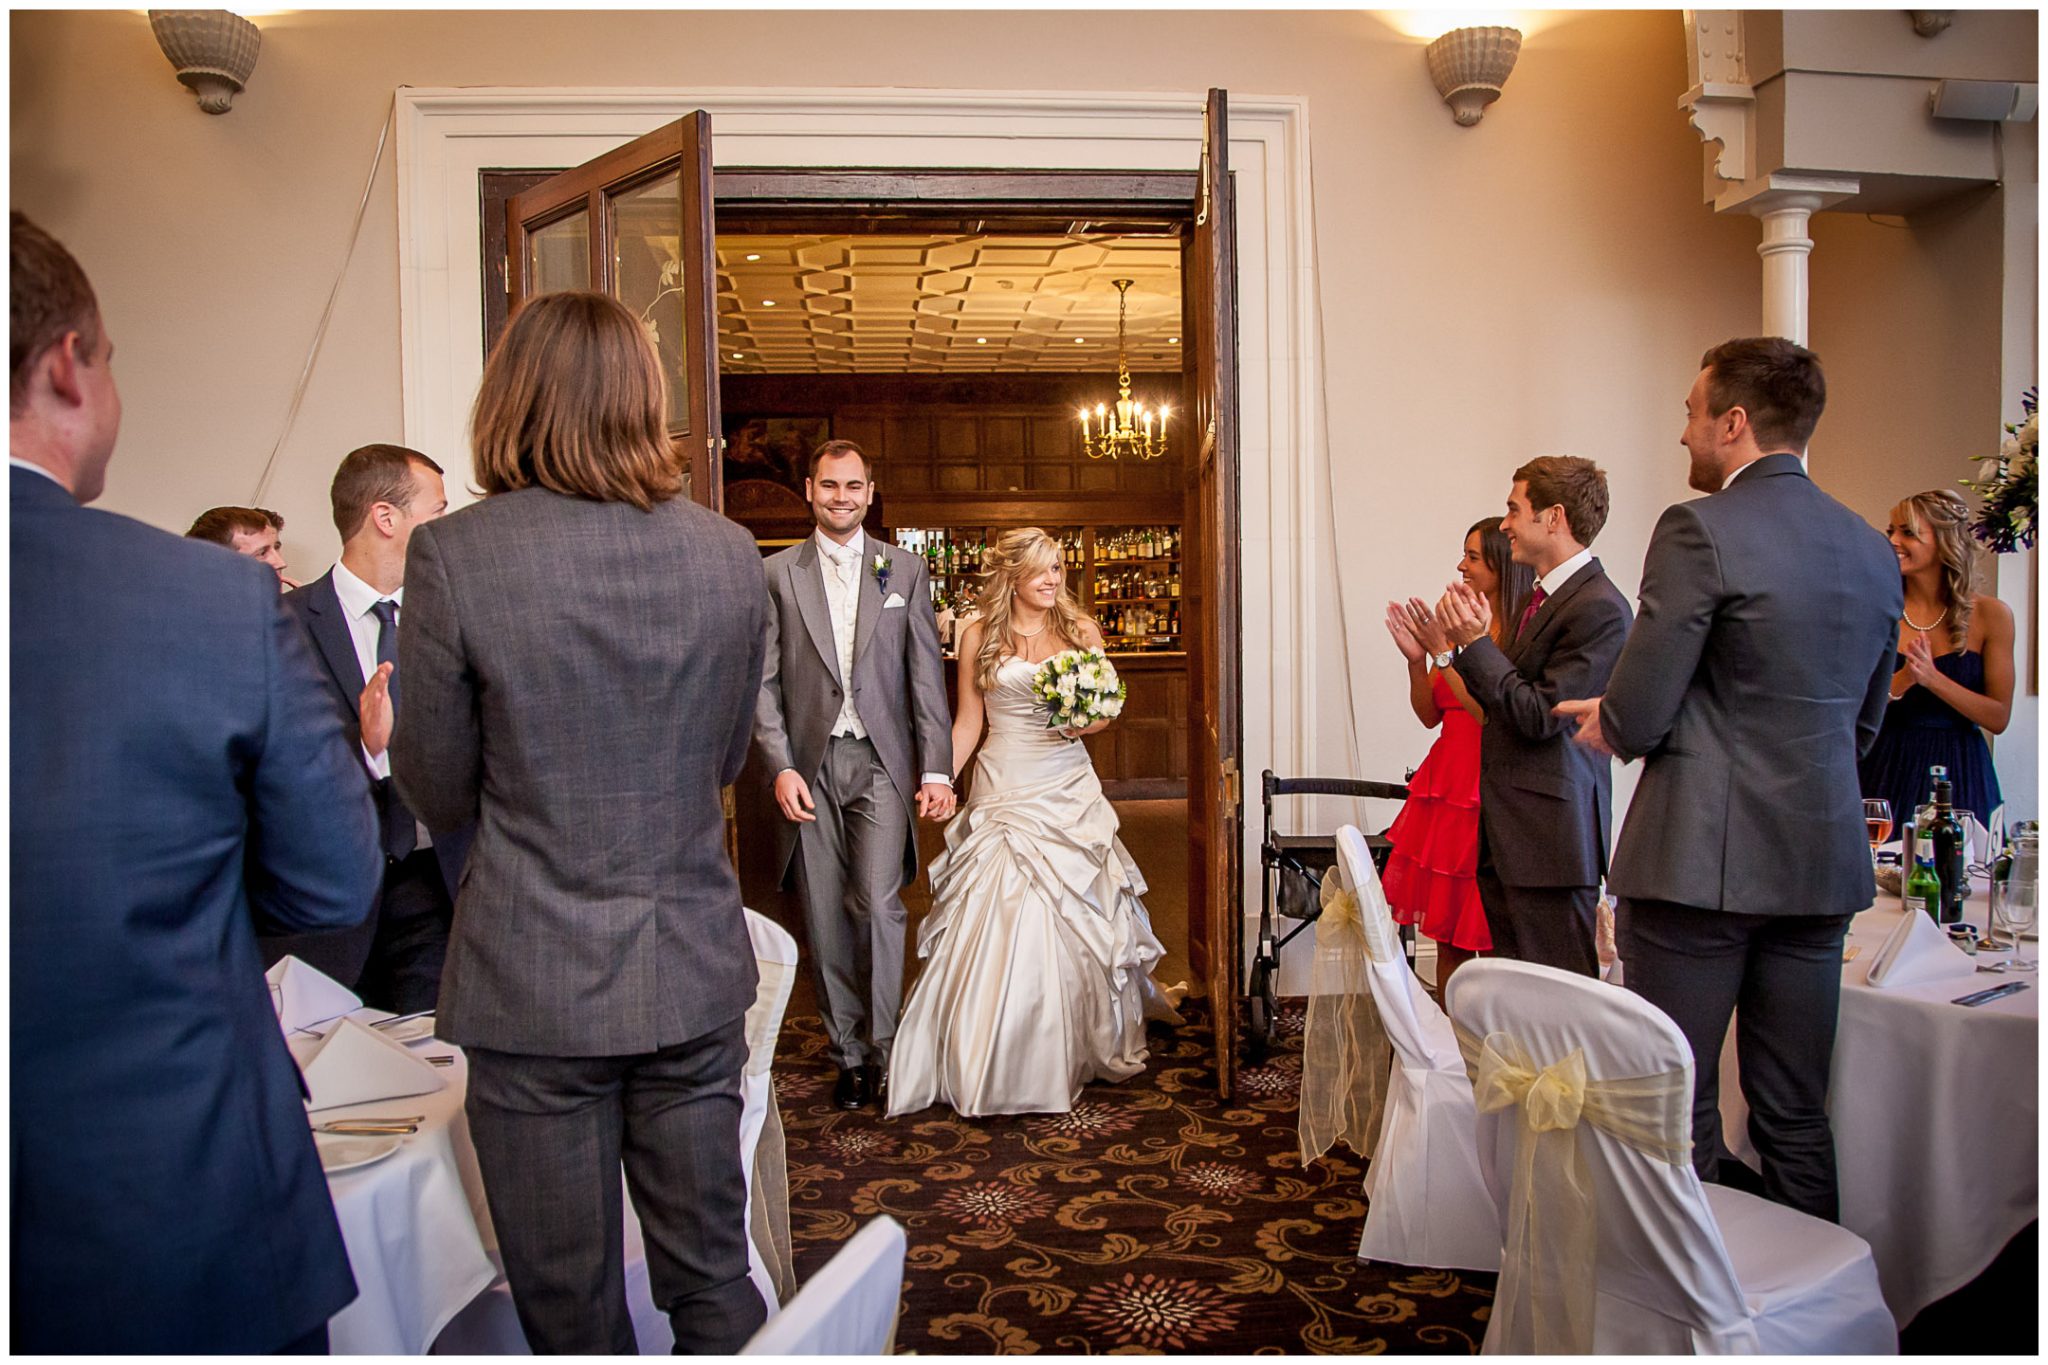 Audleys Wood wedding photography couple enter dining room for wedding breakfast